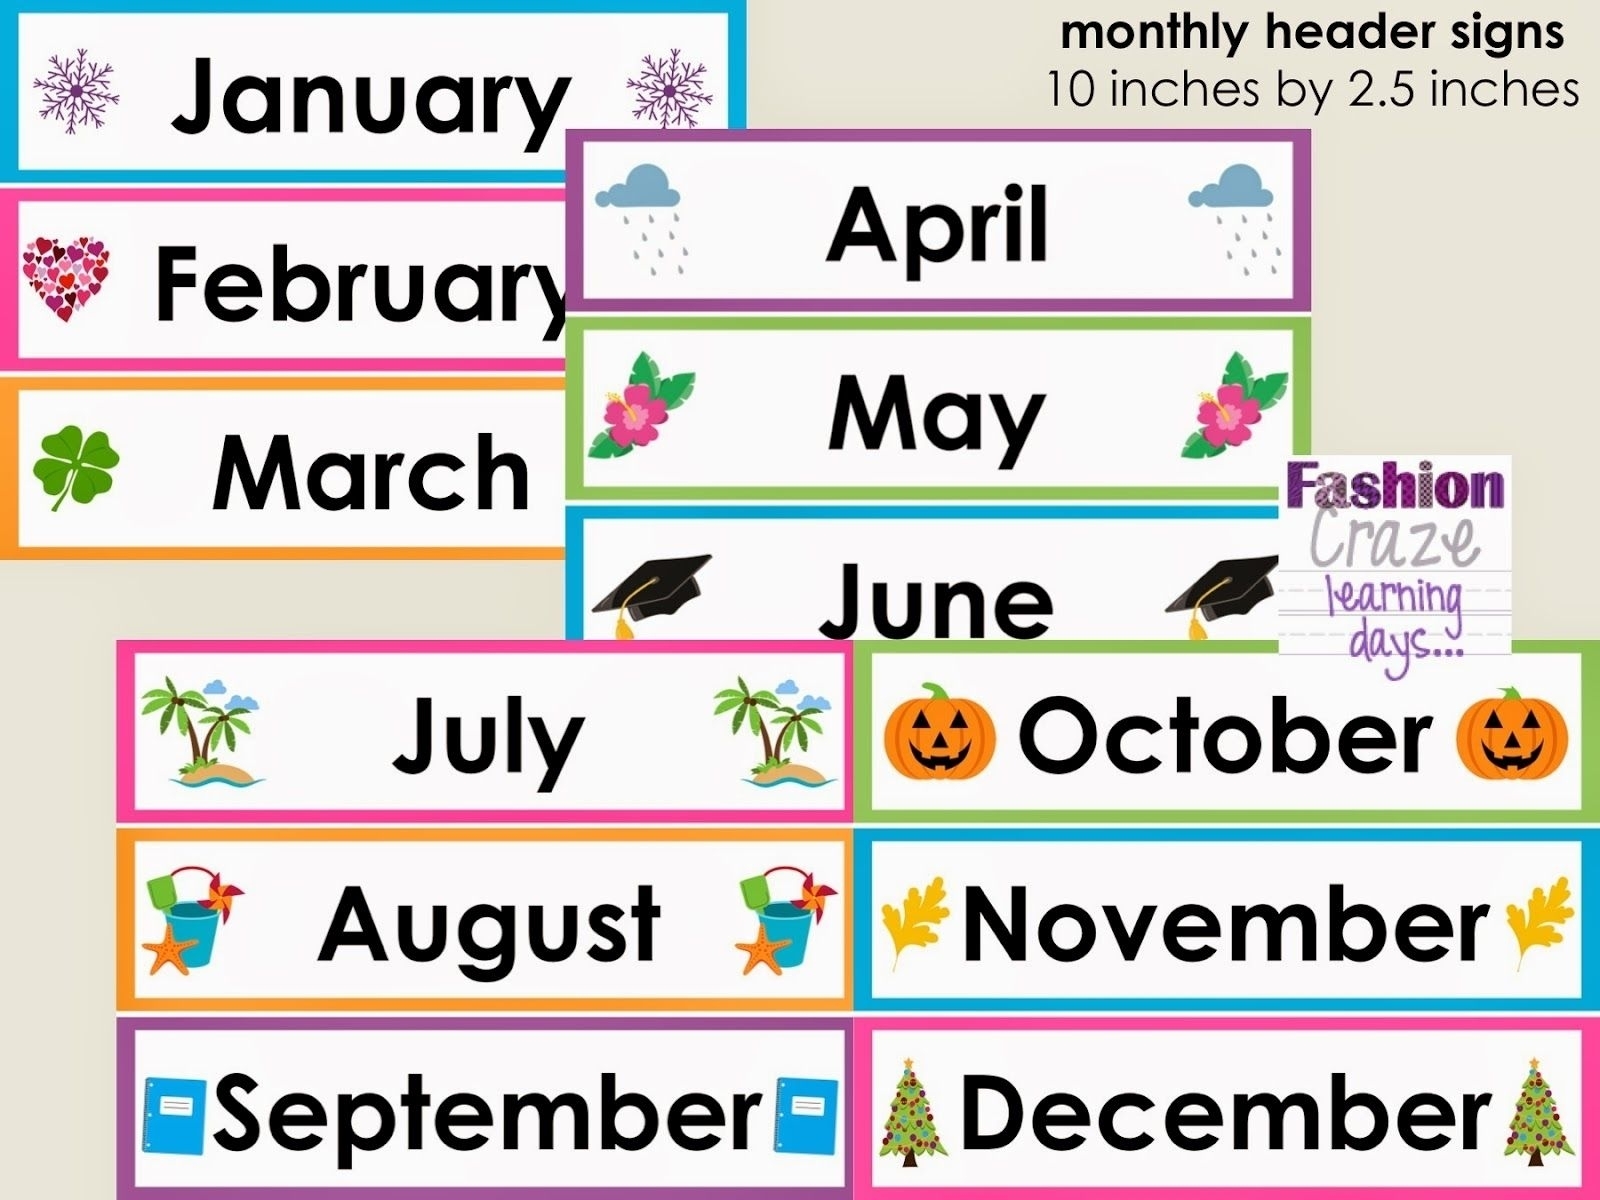 Month года. Months of the year. Months names. Months in English. All months of the year.